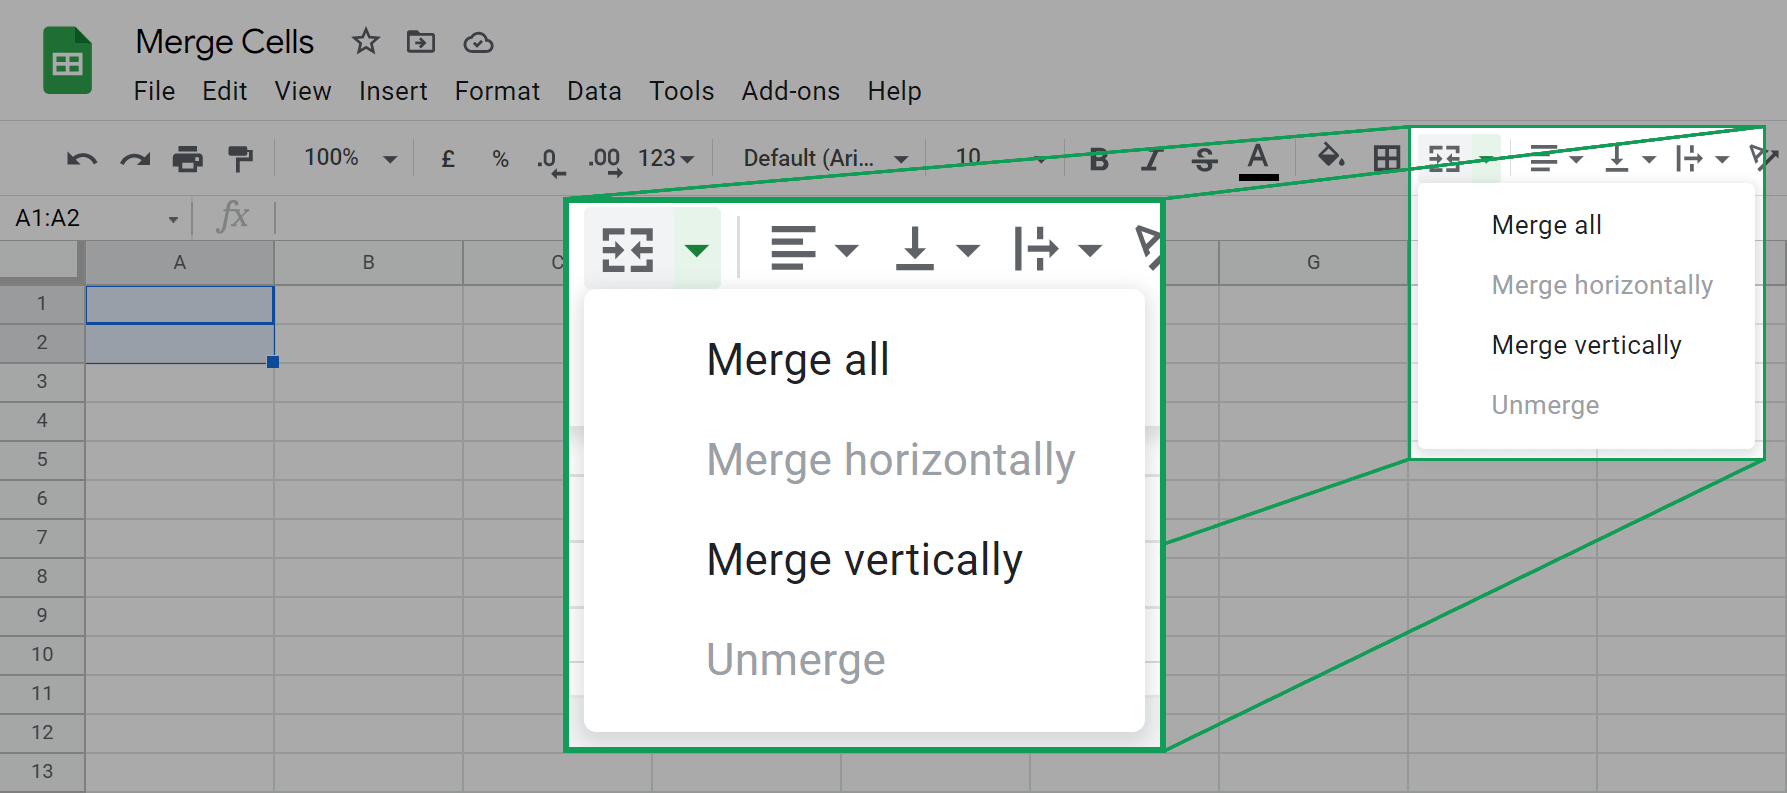 close up image of what the merge cells dropdown looks like in the google sheets toolbar